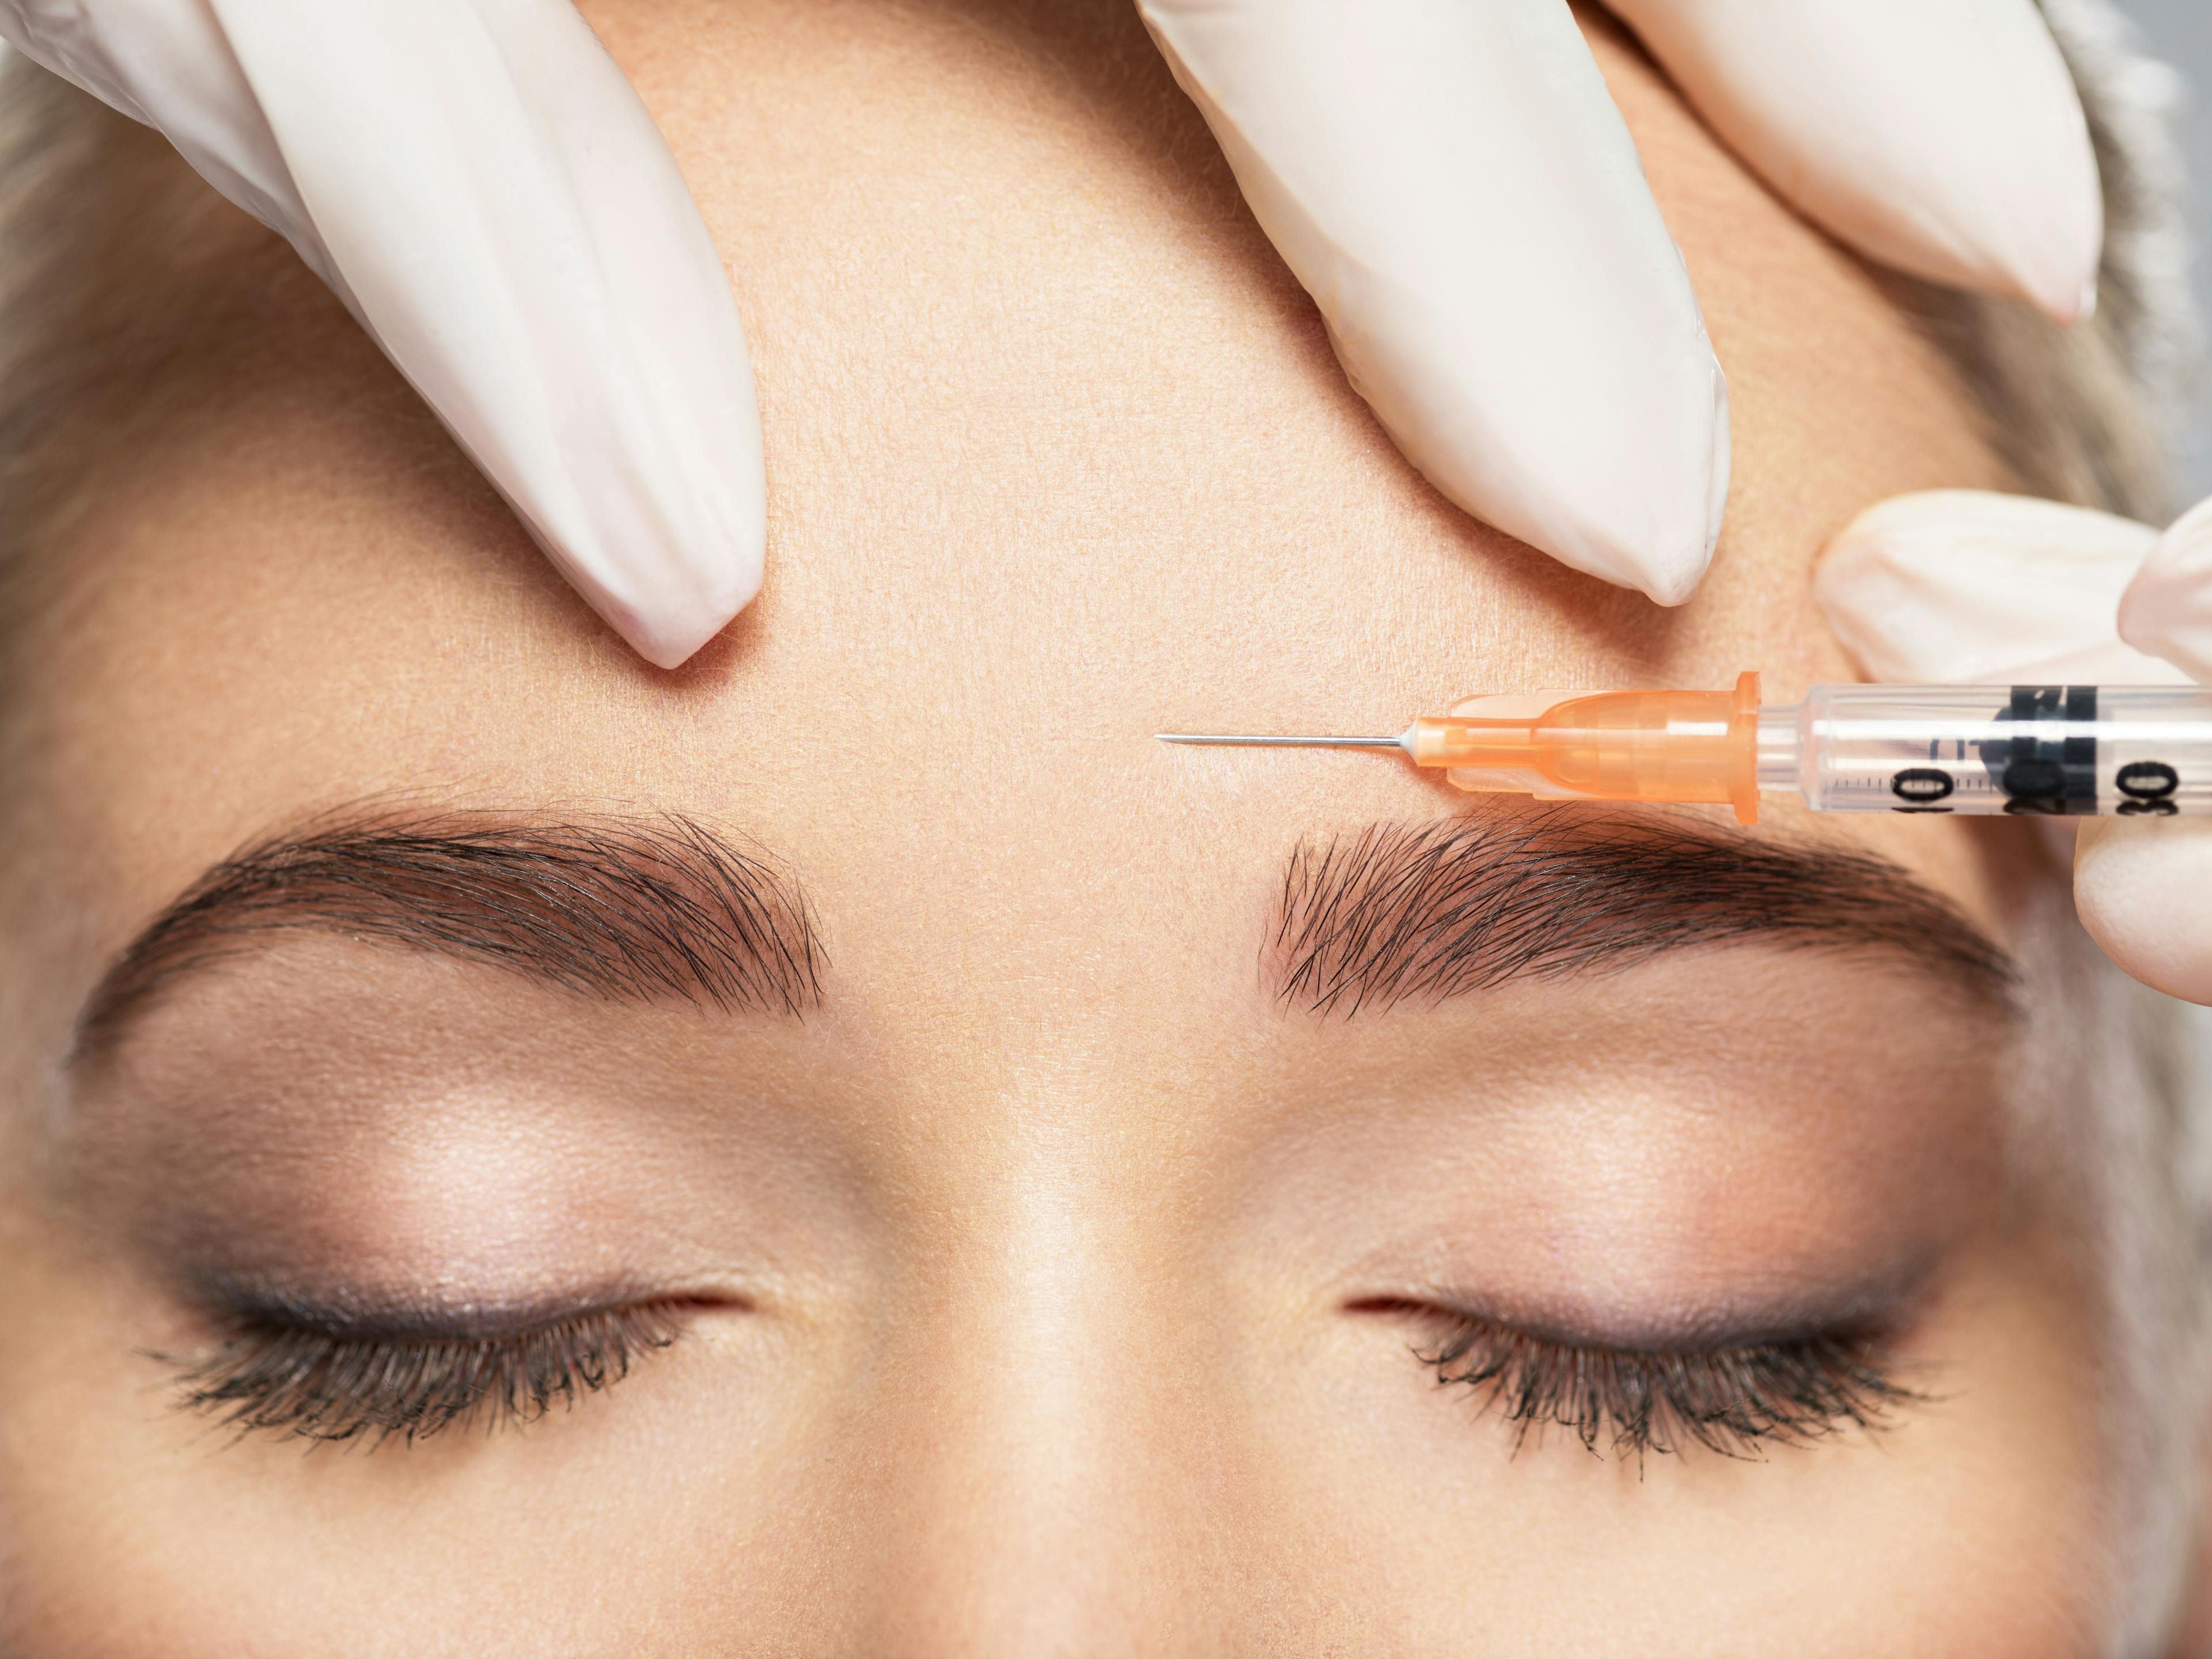 Botulinum Toxin Type A Unparallel Improvements to Skin Quality